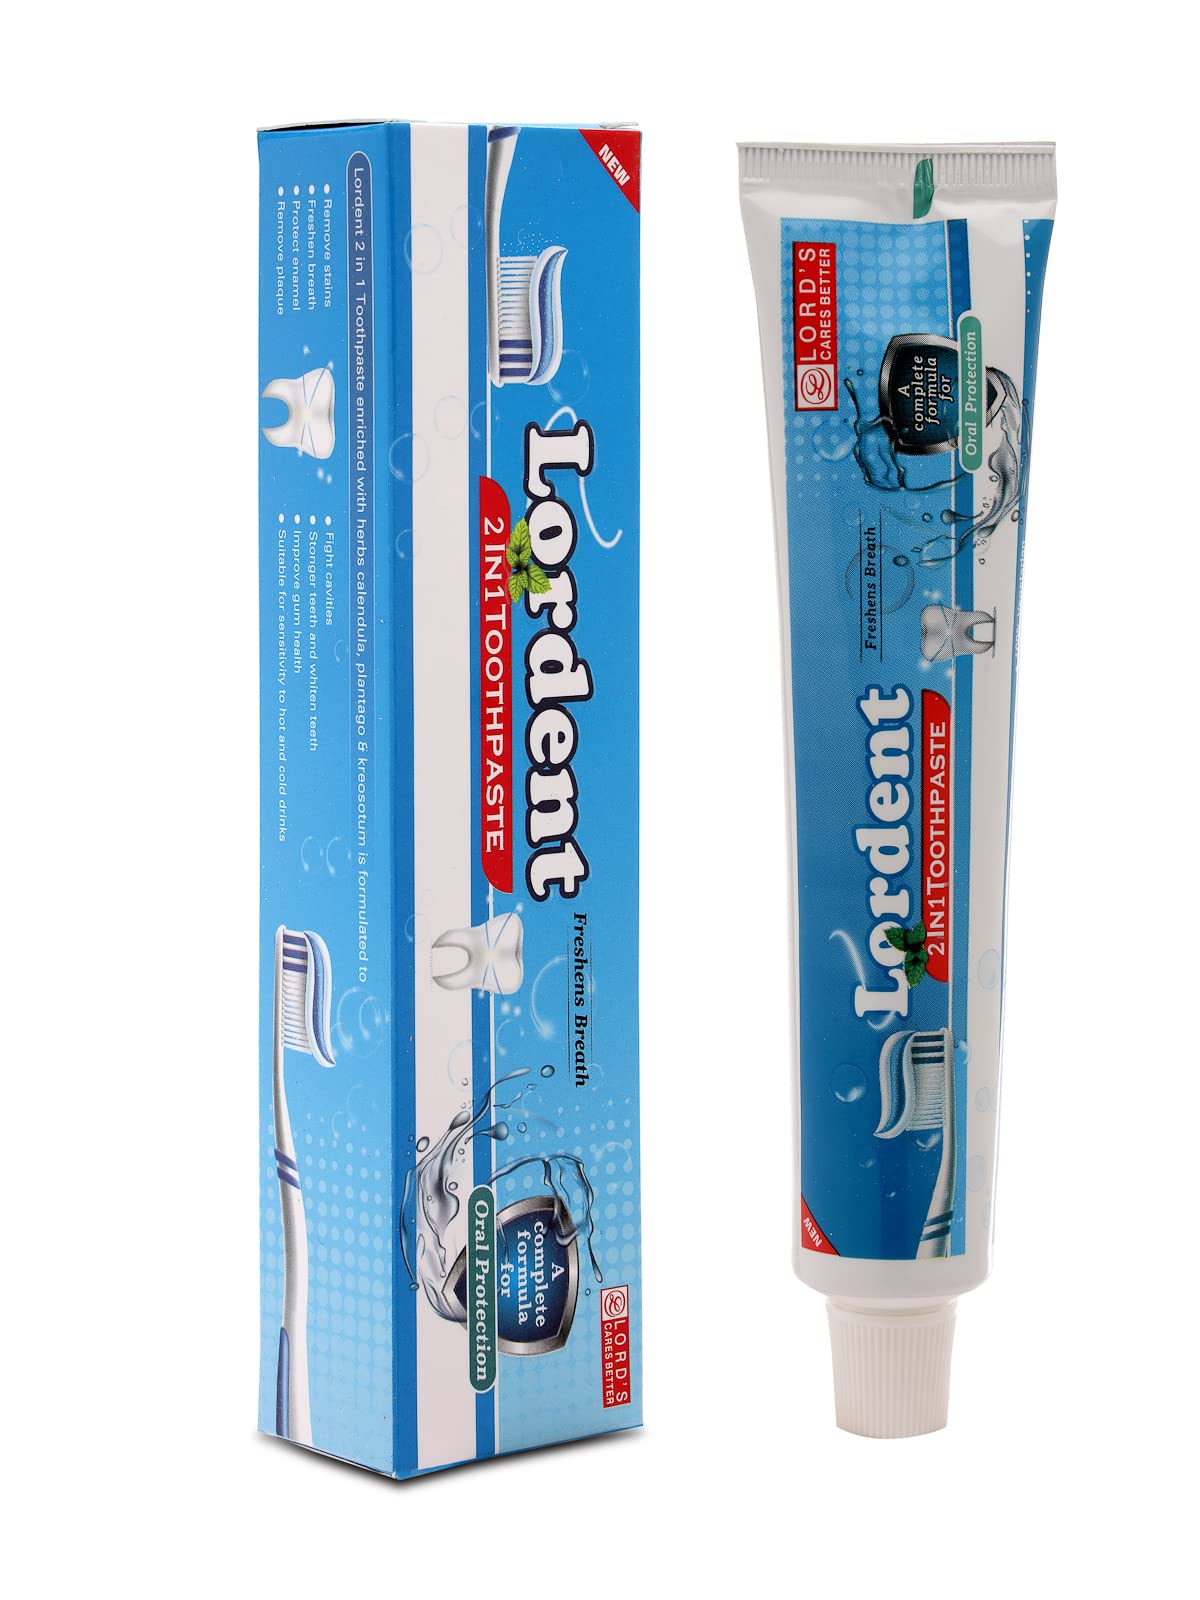 Lords Lordent 2 In 1 Toothpaste (100g)